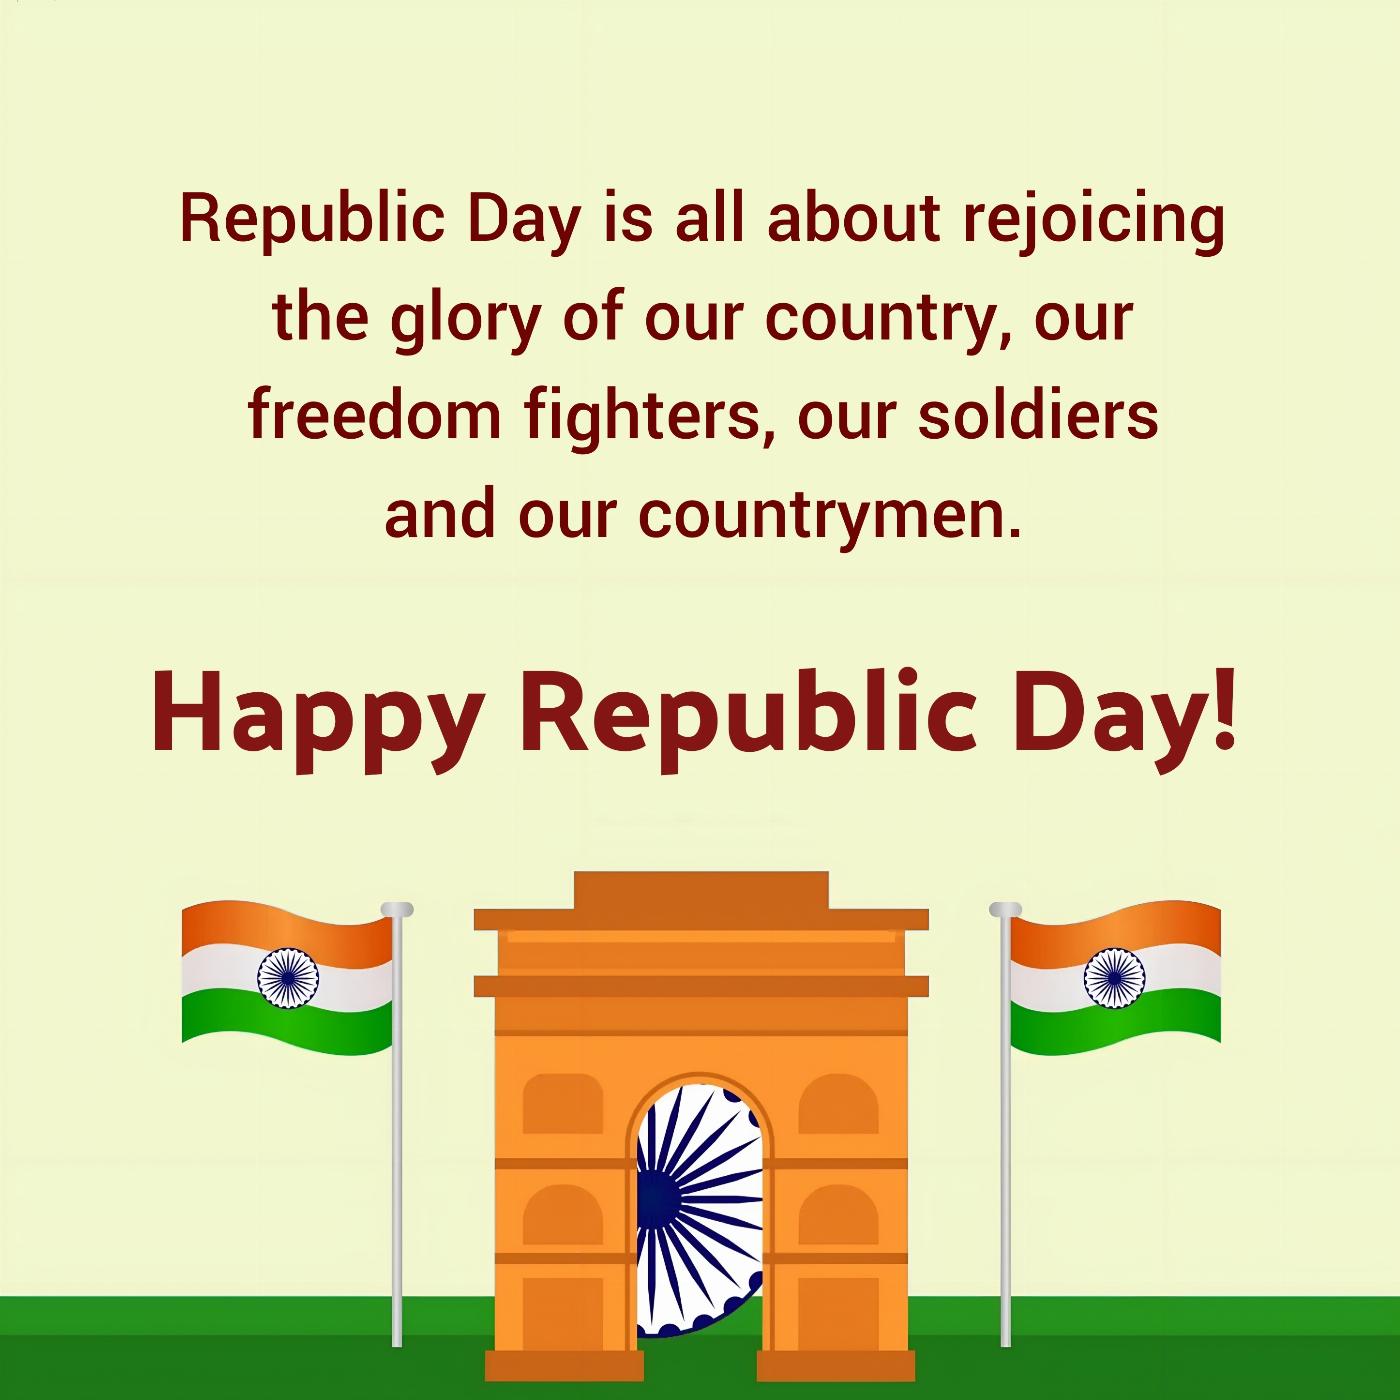 Republic Day is all about rejoicing the glory of our country